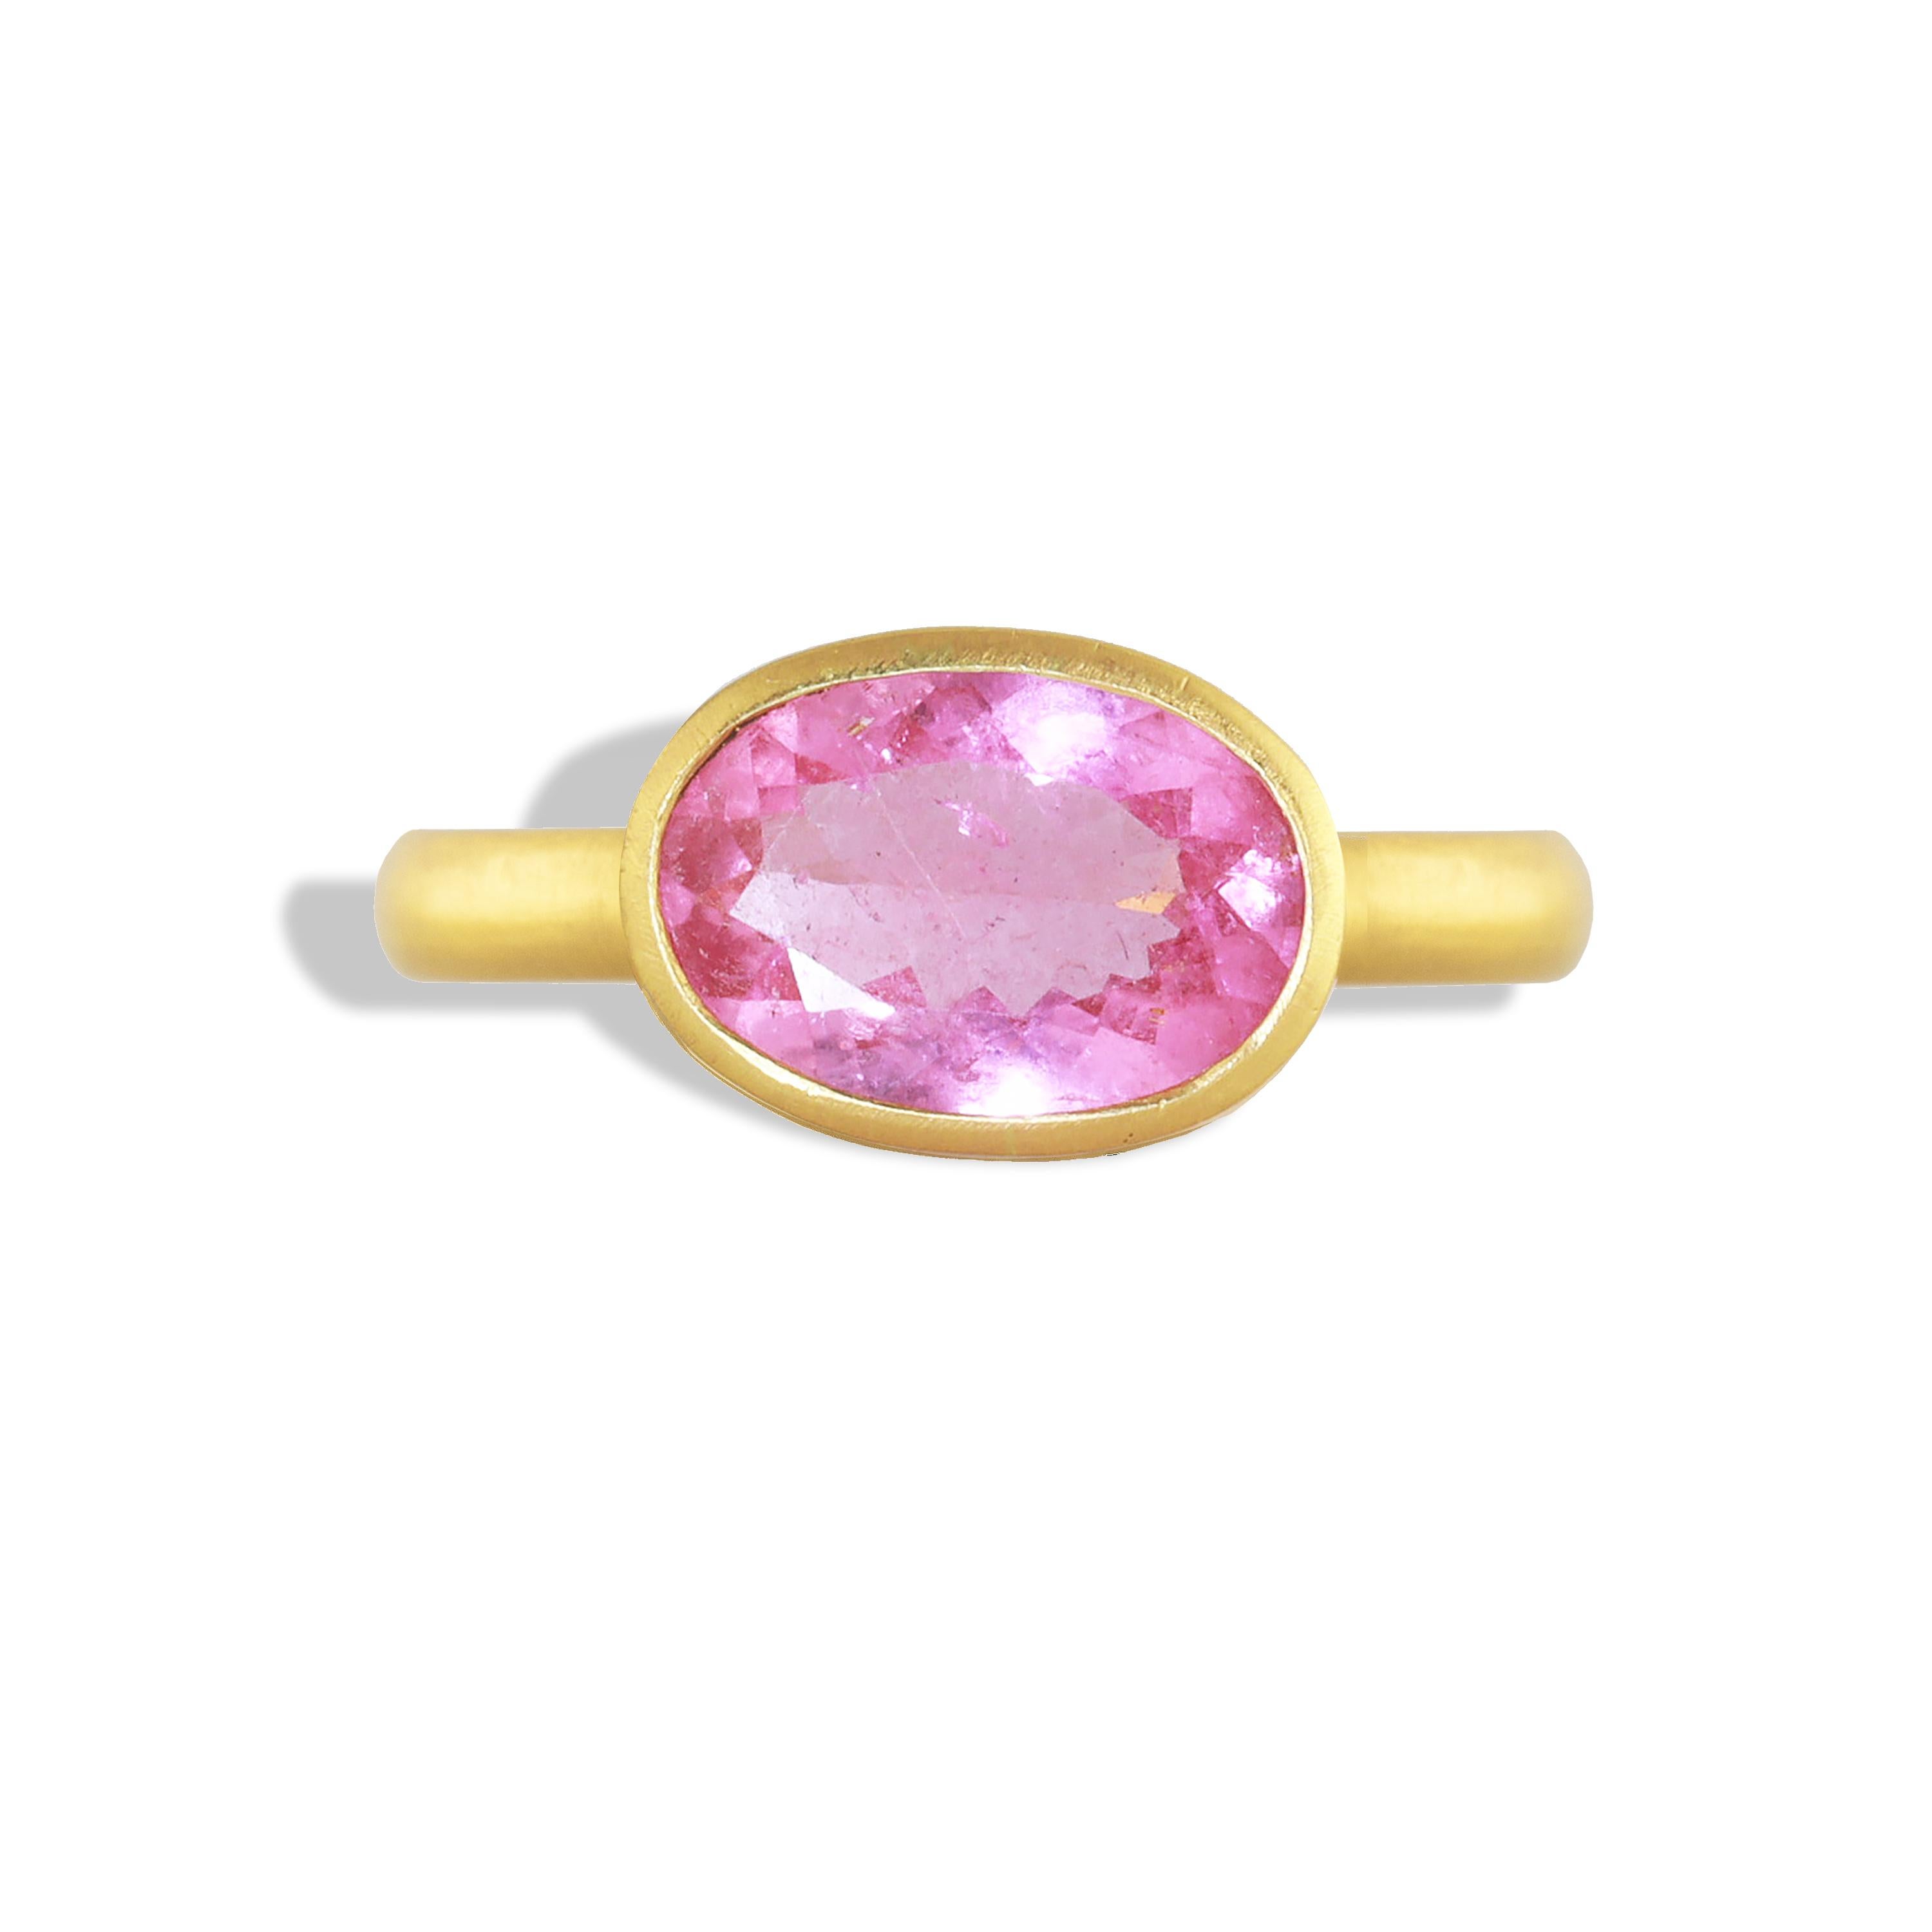 This ring features a 3.52 carat pink oval tourmaline, bezel set in 22k gold. Cut-outs on the sides show the gemstone peeking through. This ring was made with the technique known as 'jali-work.'
Jail work features a lattice technique that is done by